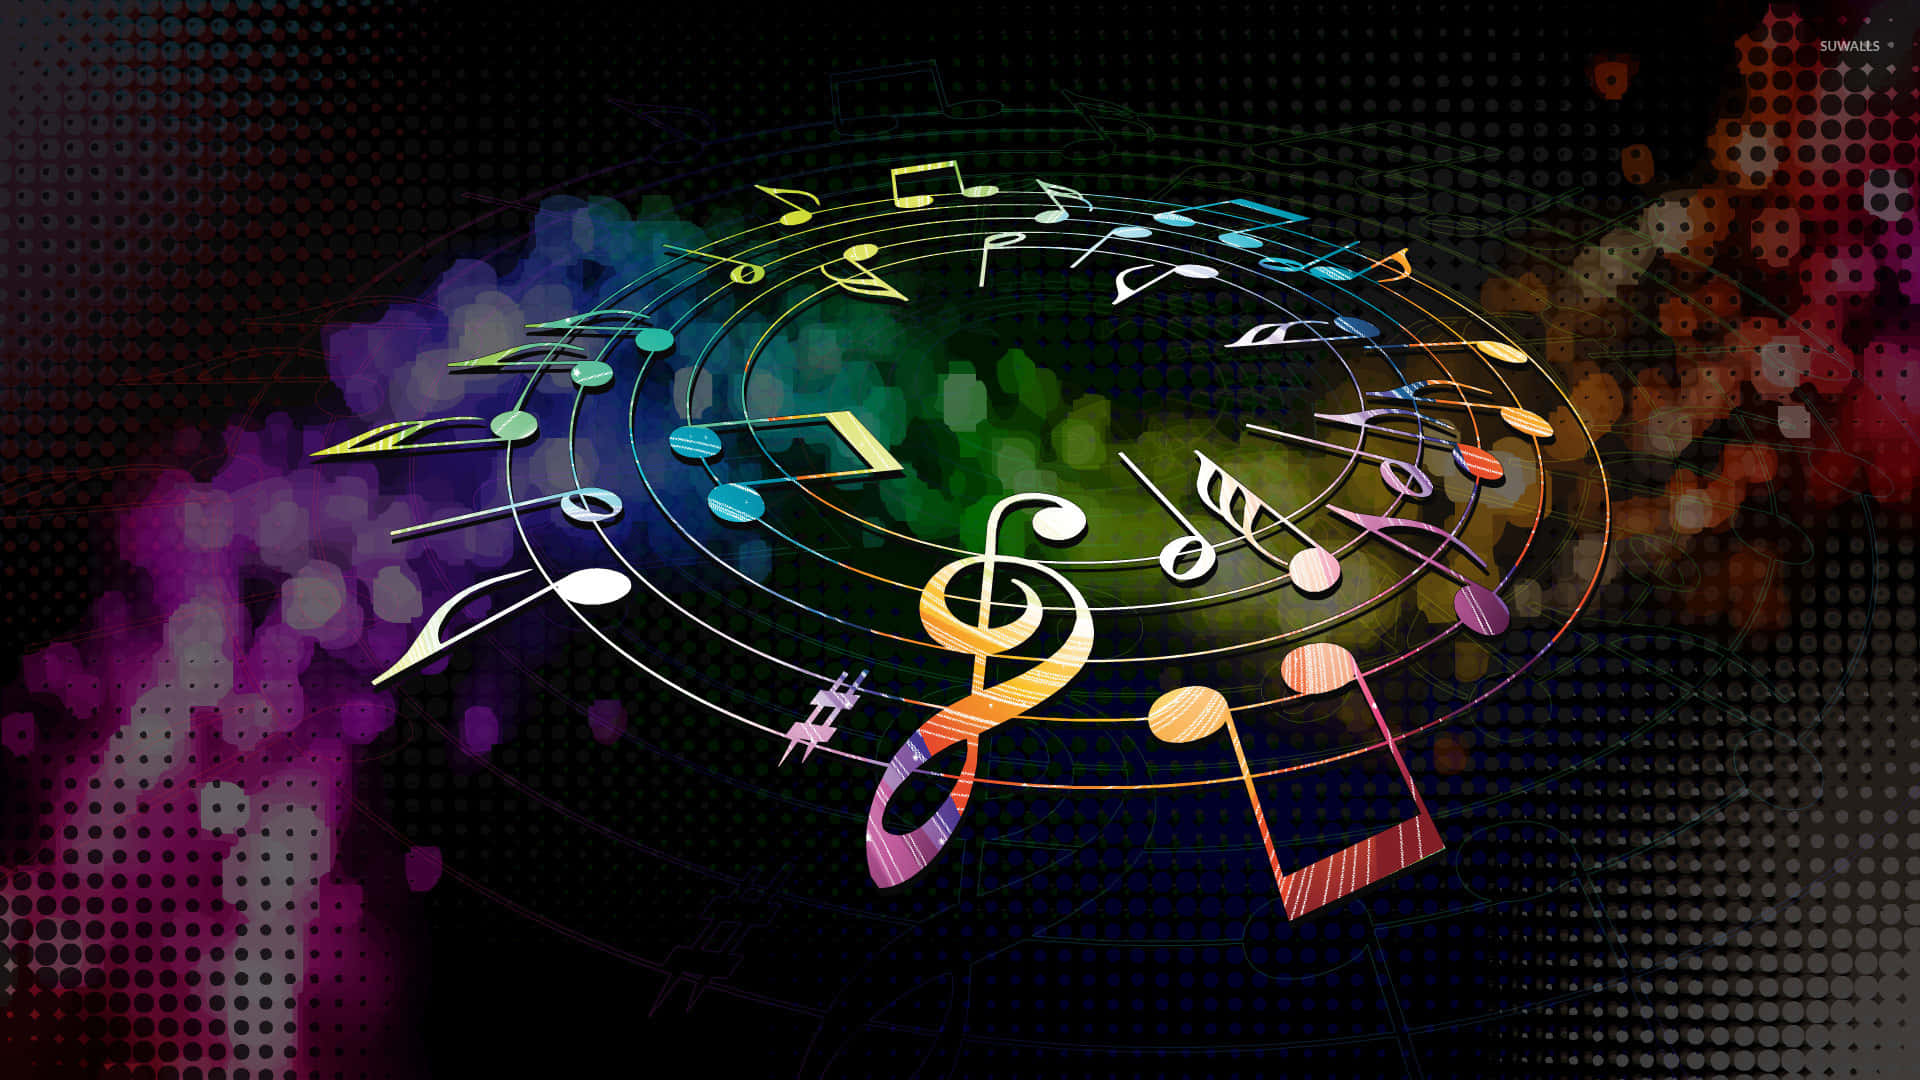 "A sea of music notes creates an infinite landscape of creative potential."